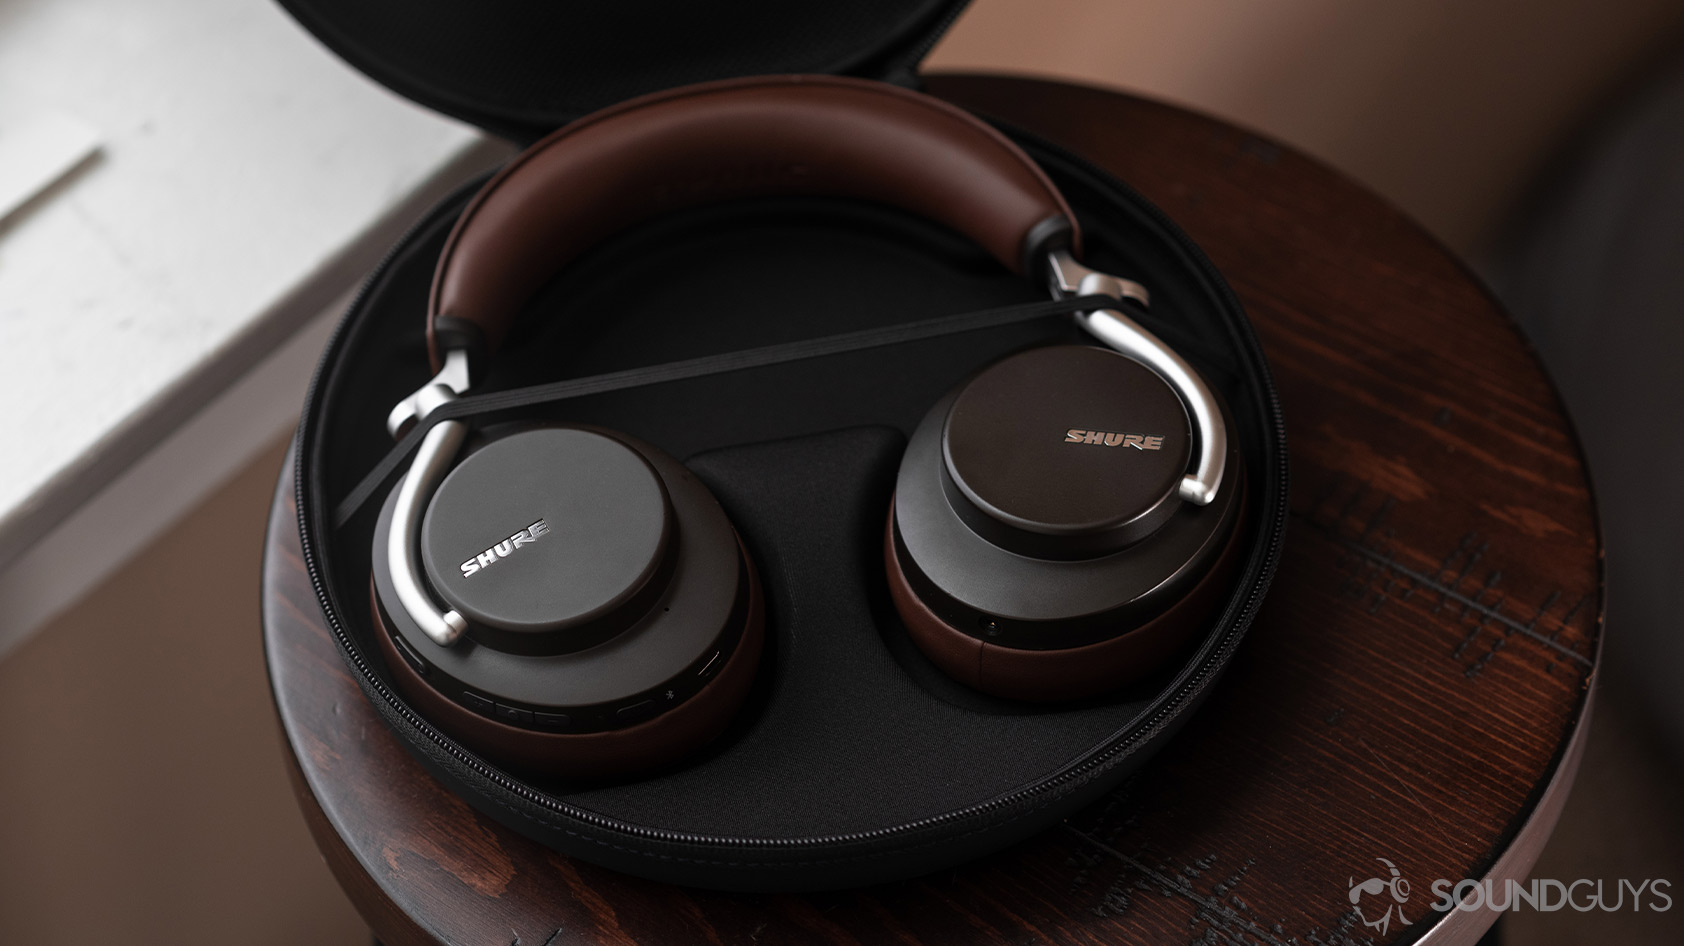 An aerial photo of the Shure Aonic 50-noise canceling headphones open carrying case revealing the headphones in brown.